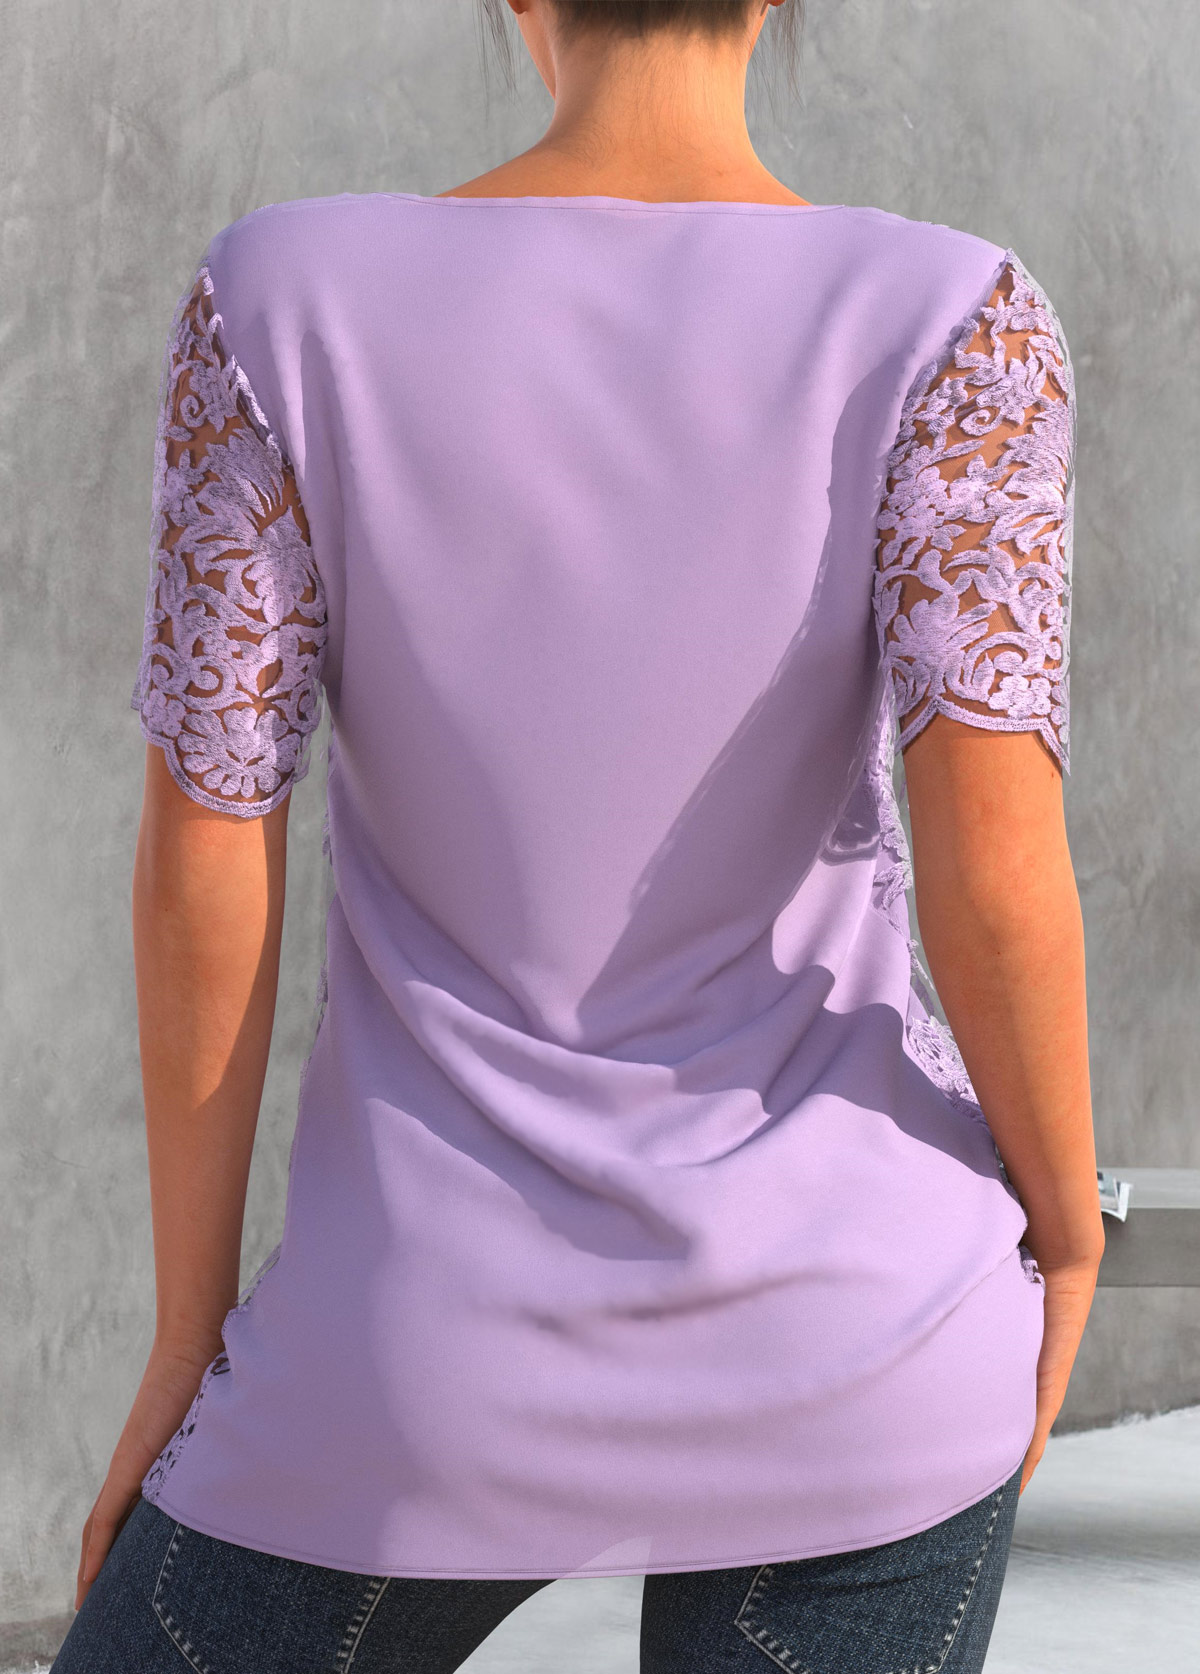 Embroidered Light Purple Lace 3/4 Sleeve T Shirt